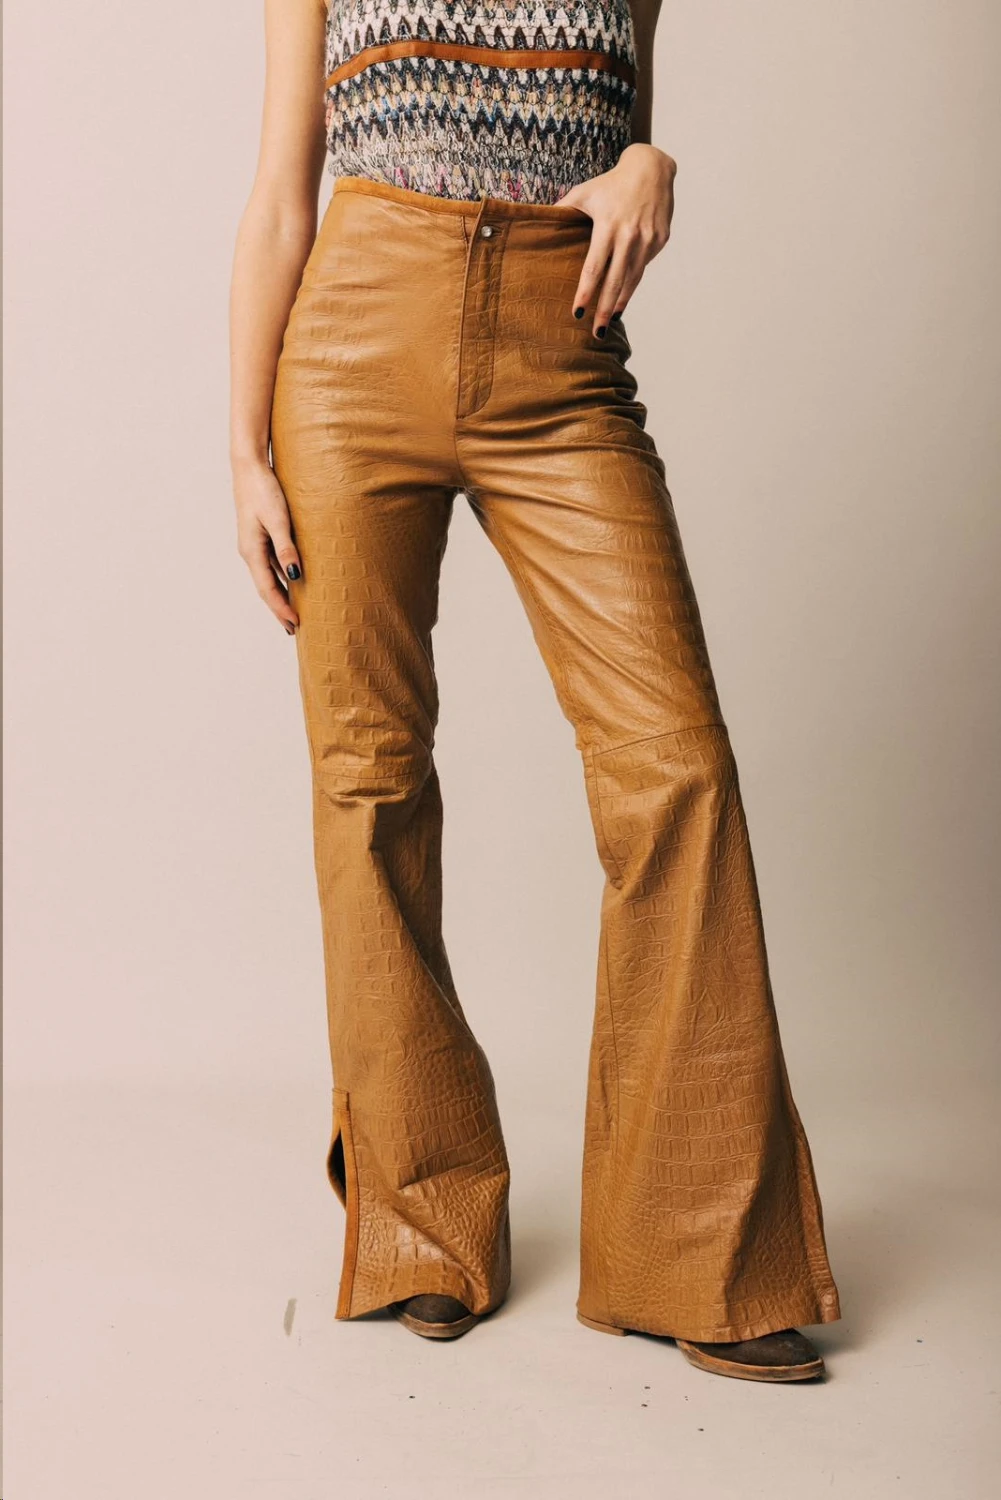 Formal Leather Pants Crocco camel 40